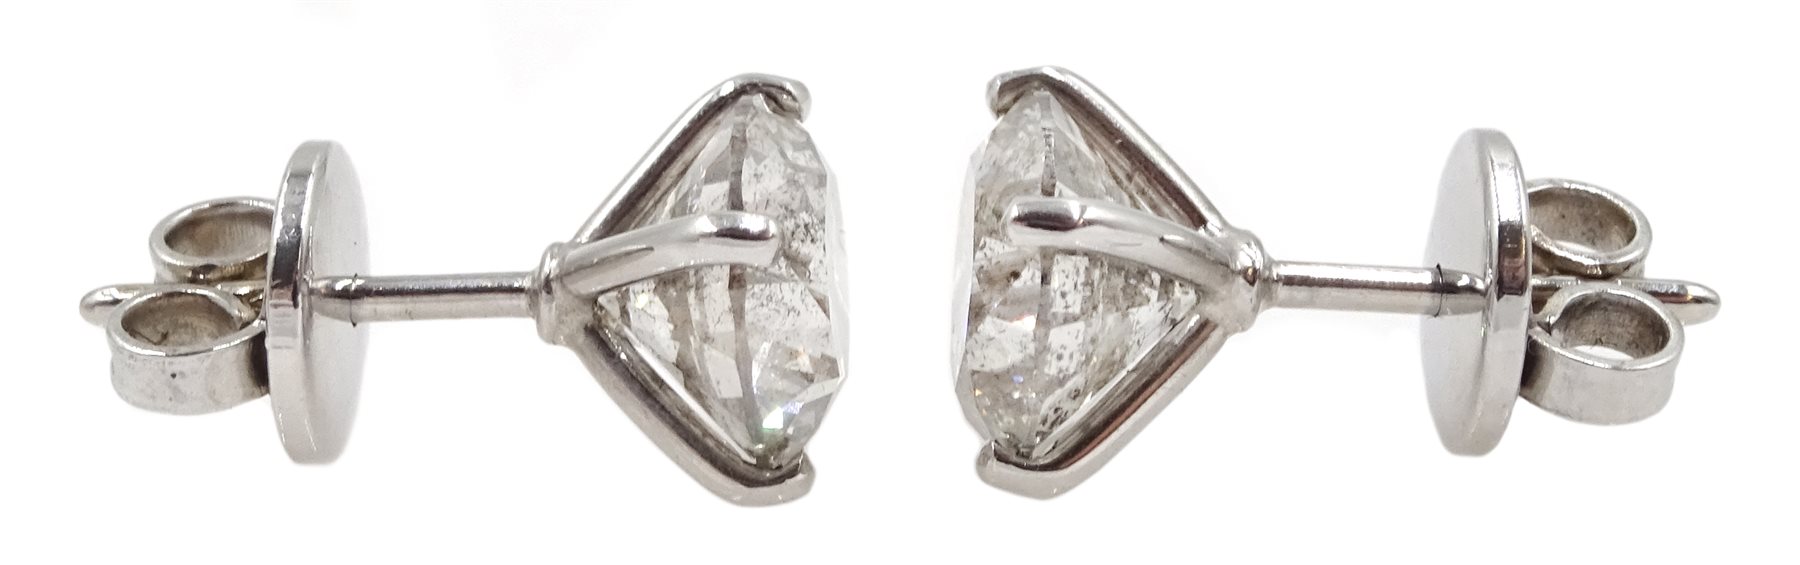 Pair of 18ct white gold diamond stud earrings, stamped 750, diamond total weight 3.52 carat - Image 3 of 4